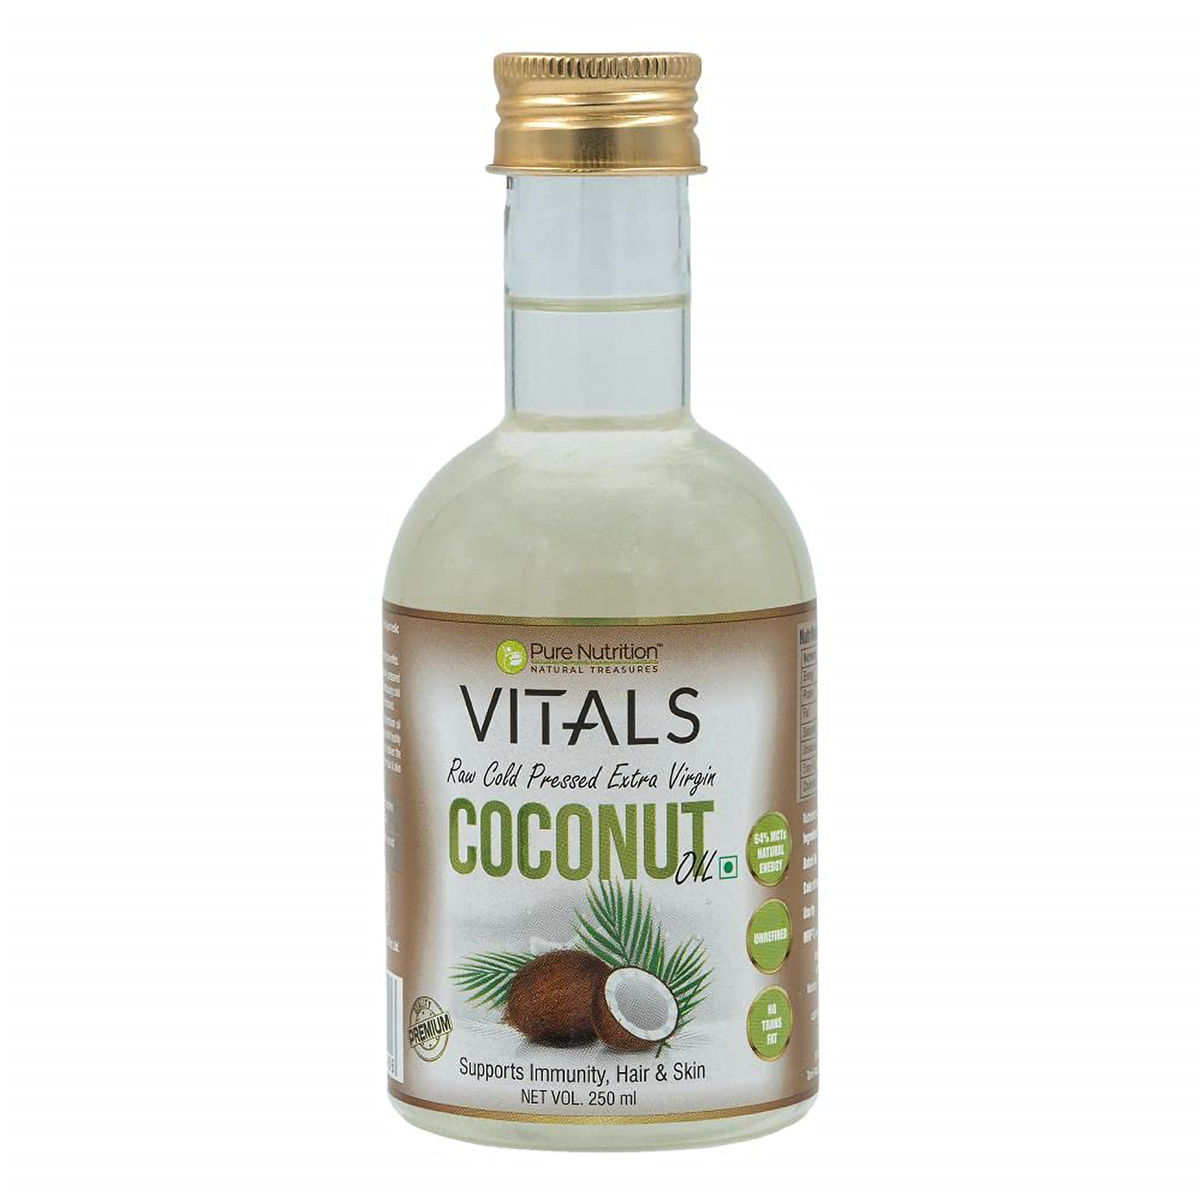 Buy Pure Nutrition Vitals Raw Cold Pressed Extra Virgin Coconut Oil, 250 ml Online